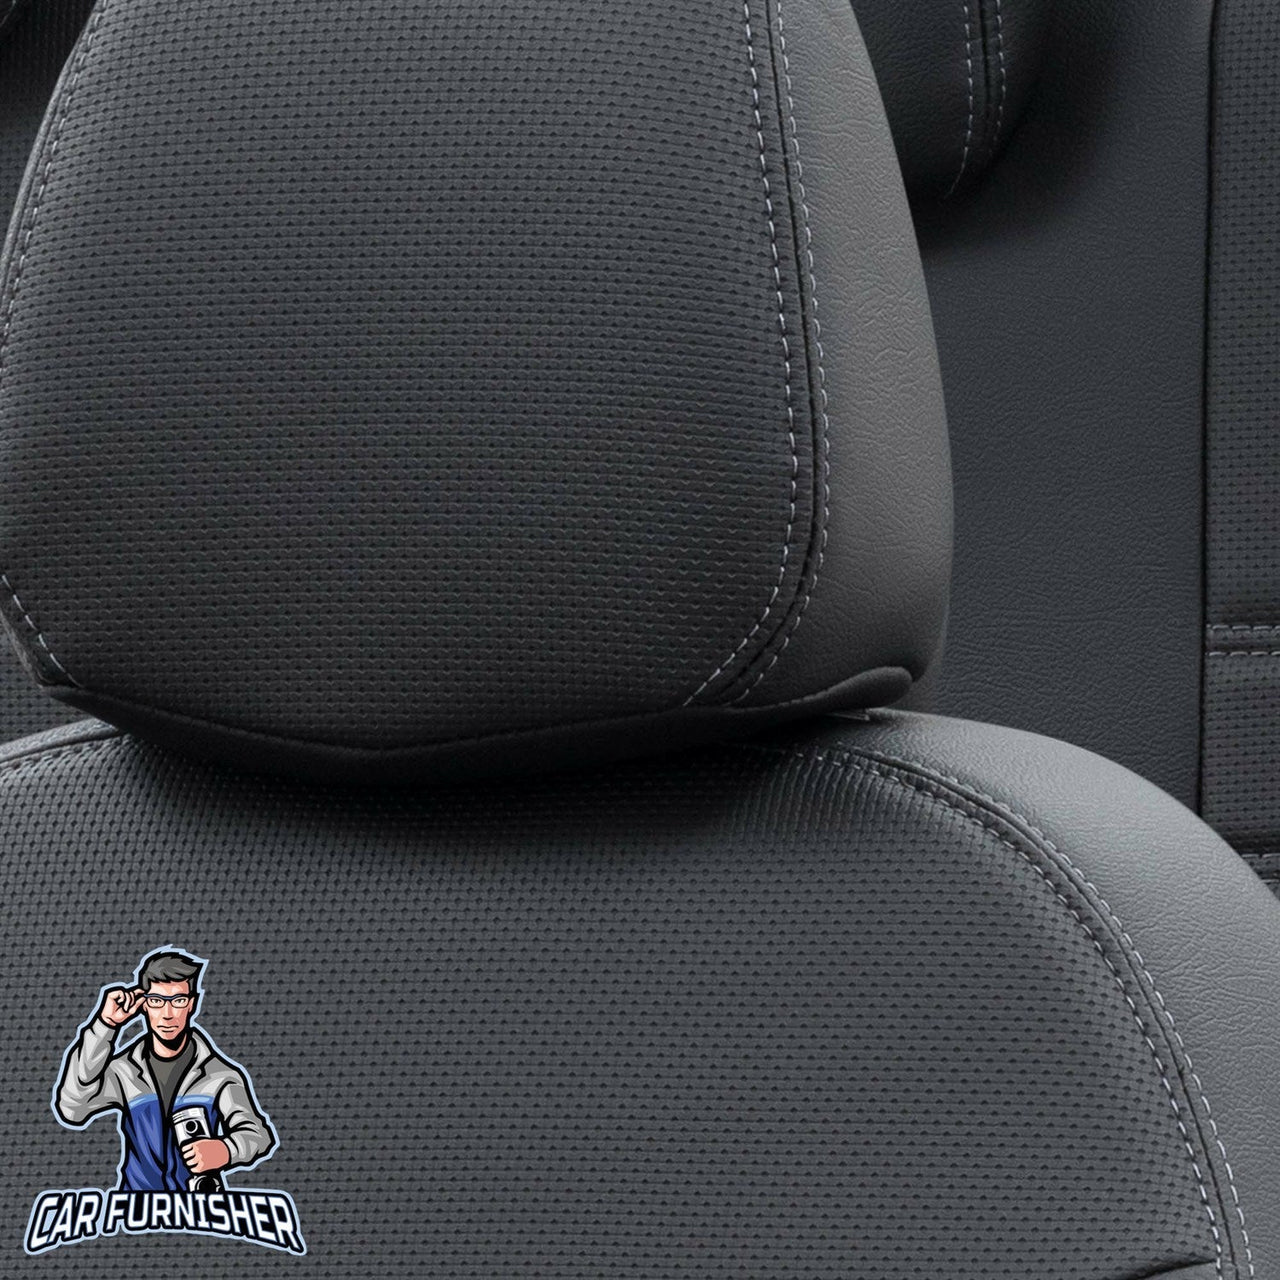 Volkswagen ID.4 Seat Cover New York Leather Design Black Leather